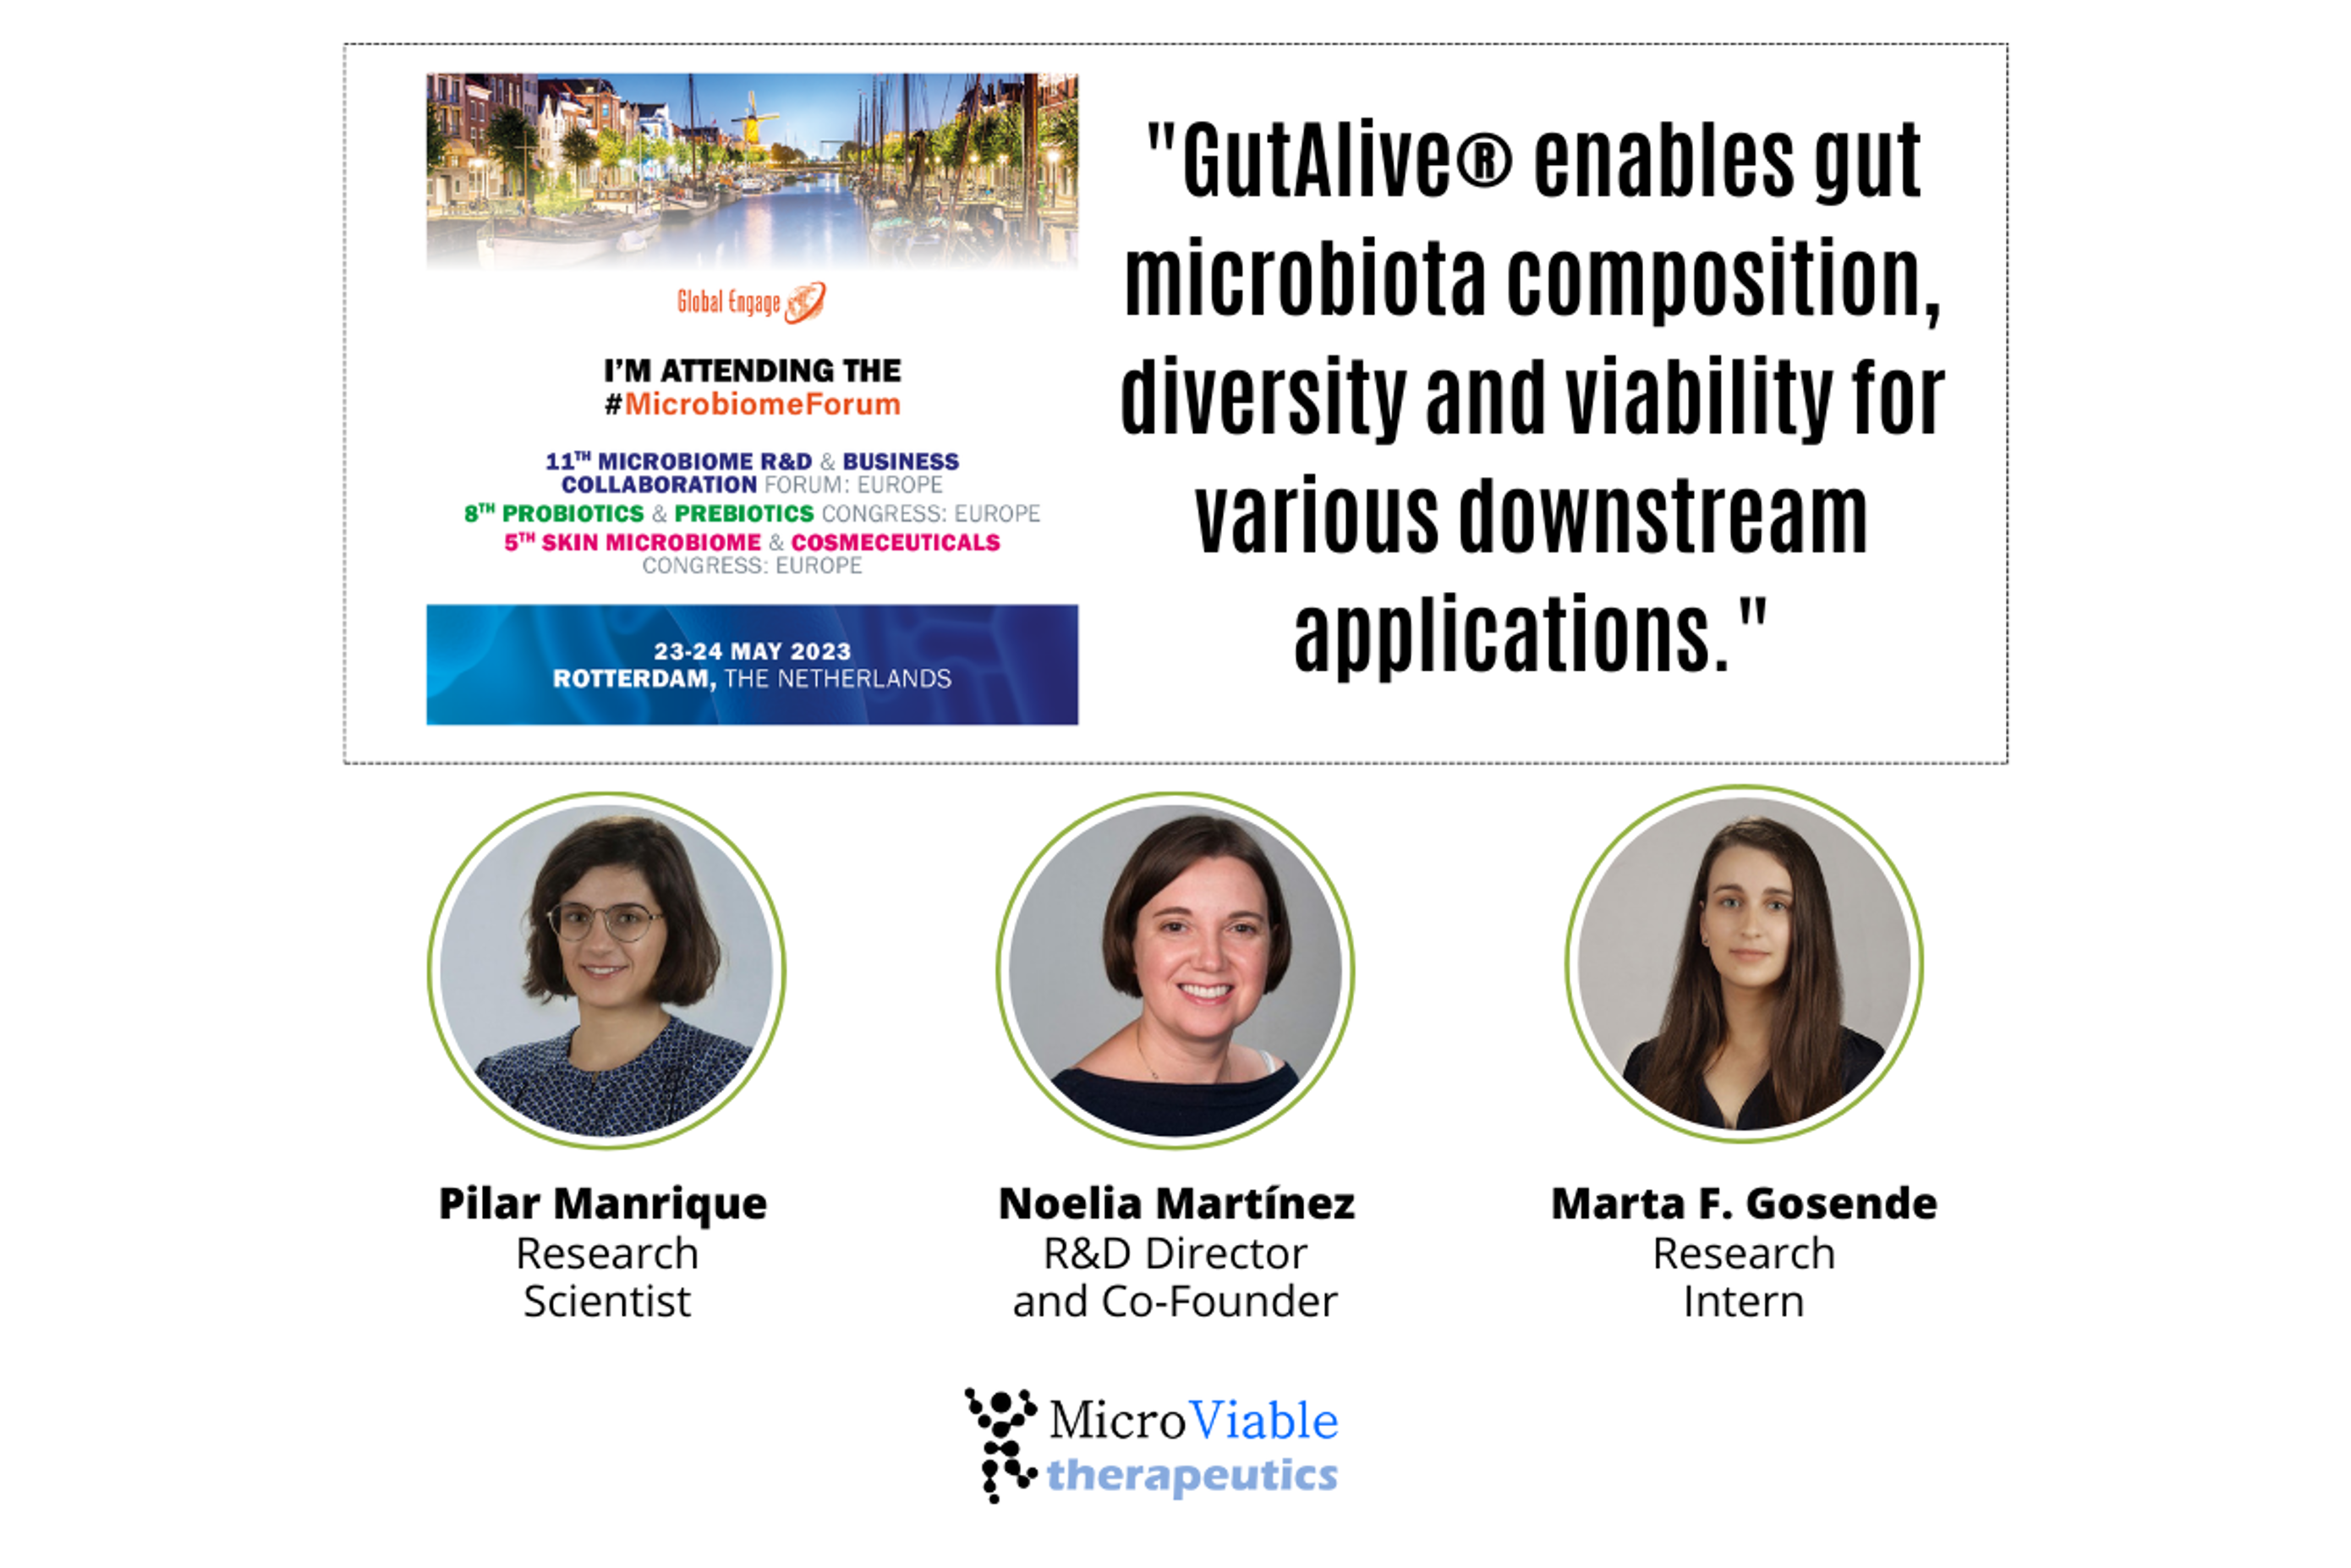 Microviable will be presenting at Microbiome & Probiotic R&D & Business Collaboration Forum